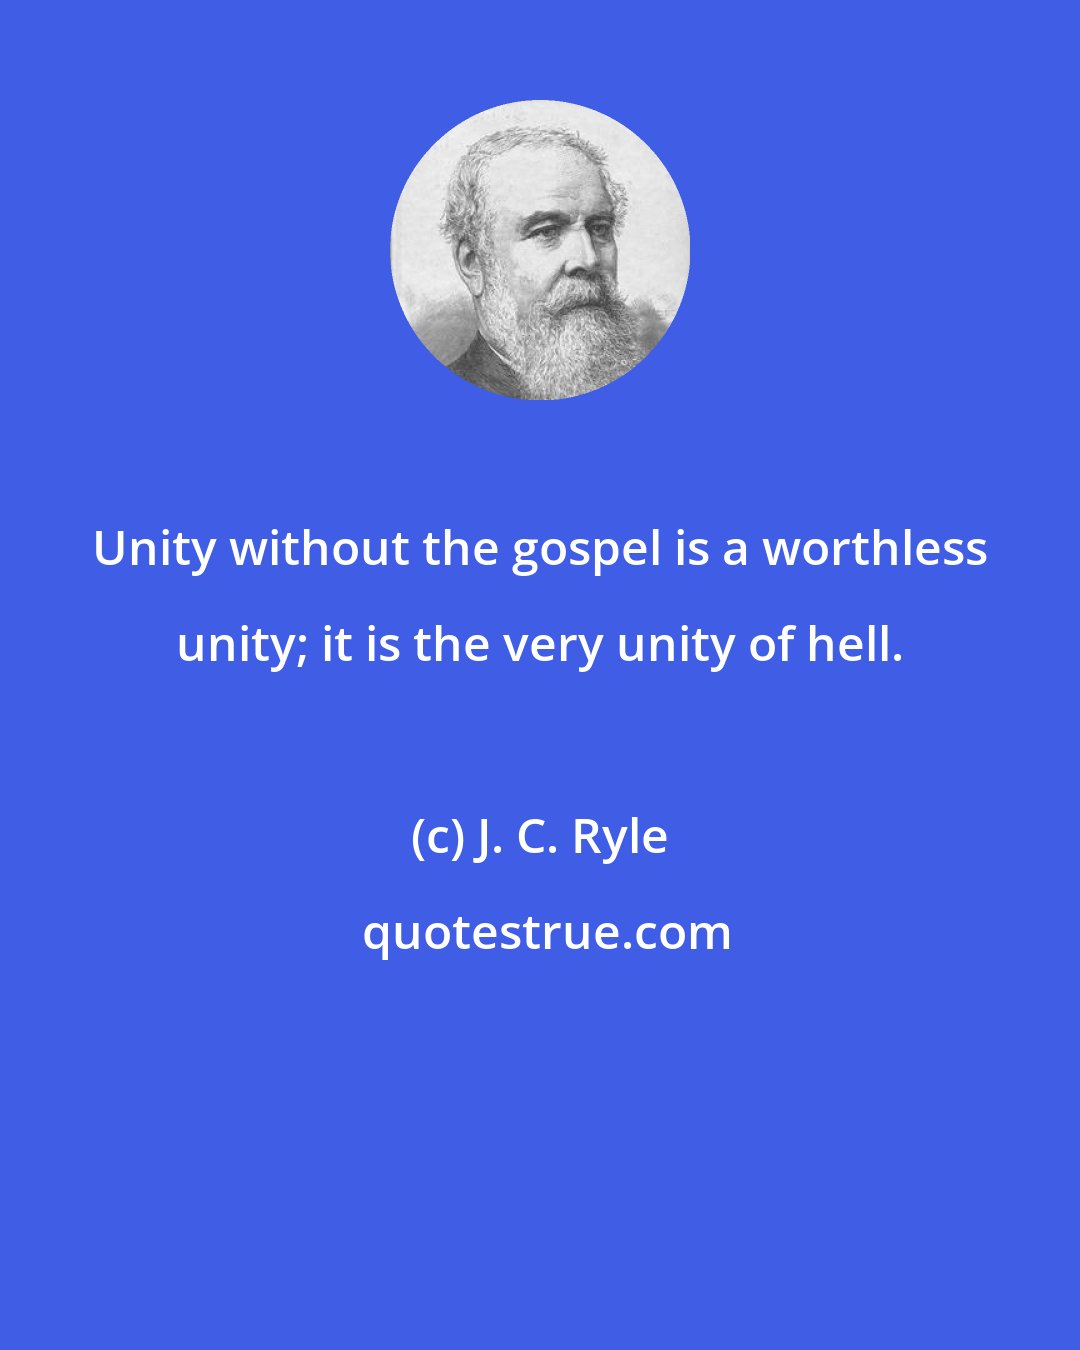 J. C. Ryle: Unity without the gospel is a worthless unity; it is the very unity of hell.